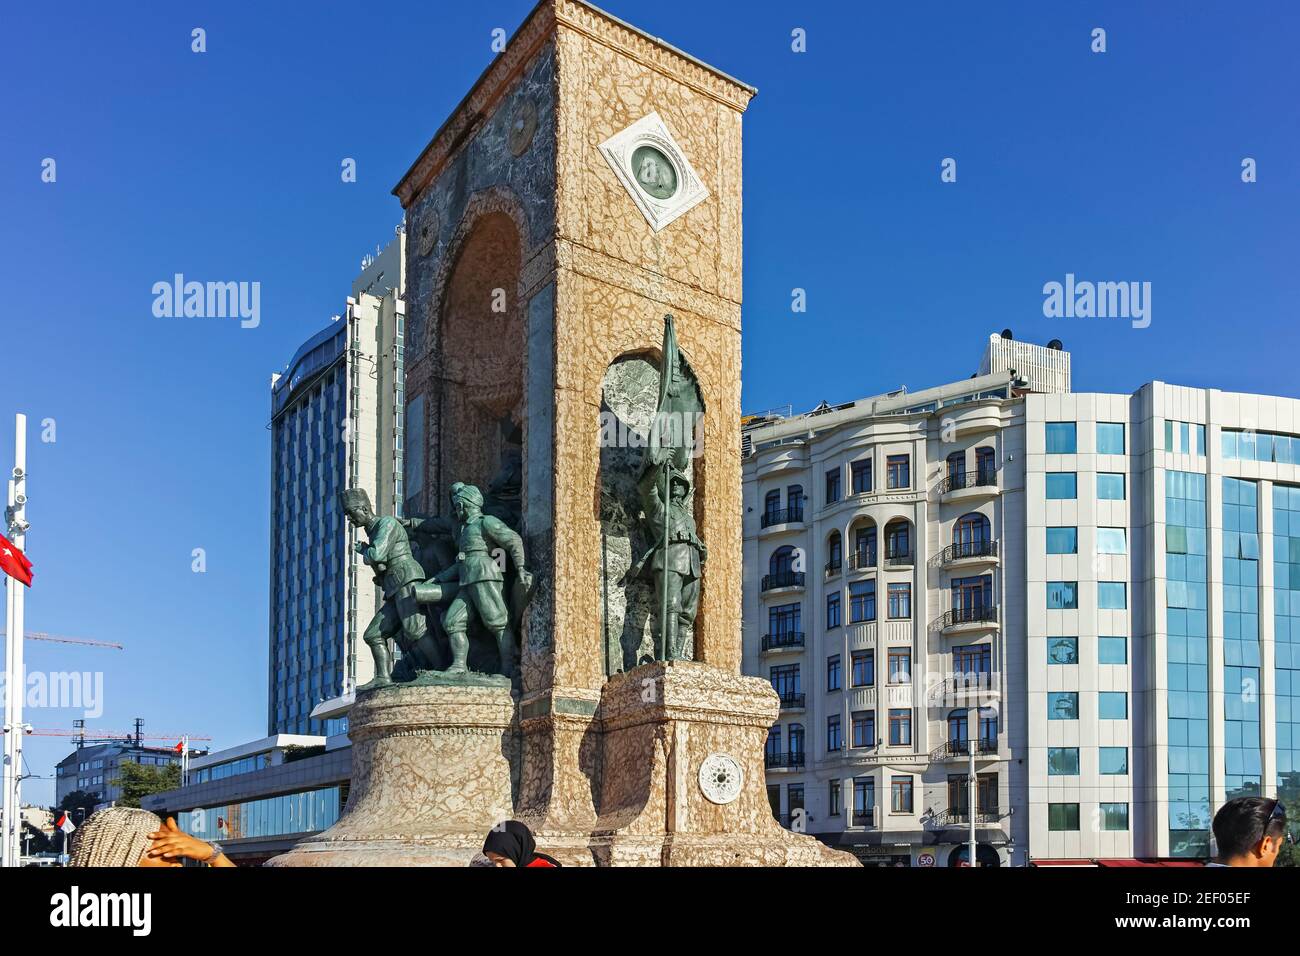 ISTANBUL, TURKEY - JULY 26, 2019: The Republic Monument at Taksim Square at the center of city of Istanbul, Turkey Stock Photo